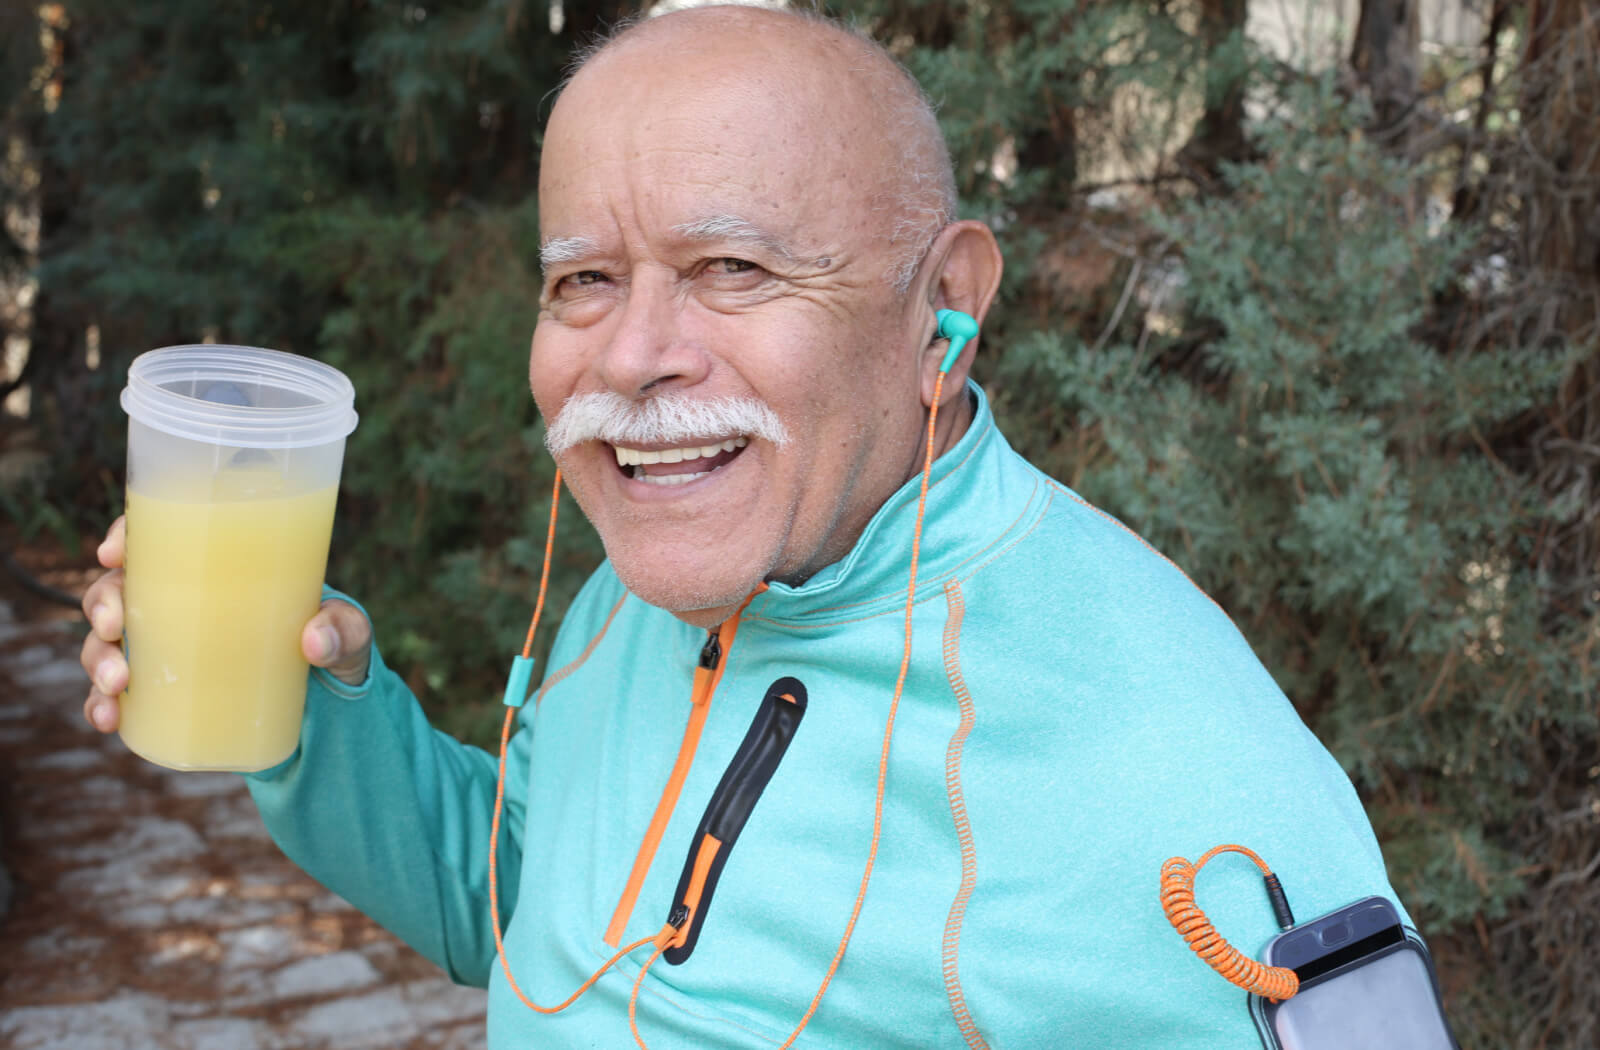 An older adult man with earphones in, holding a protein shake while getting some exercise